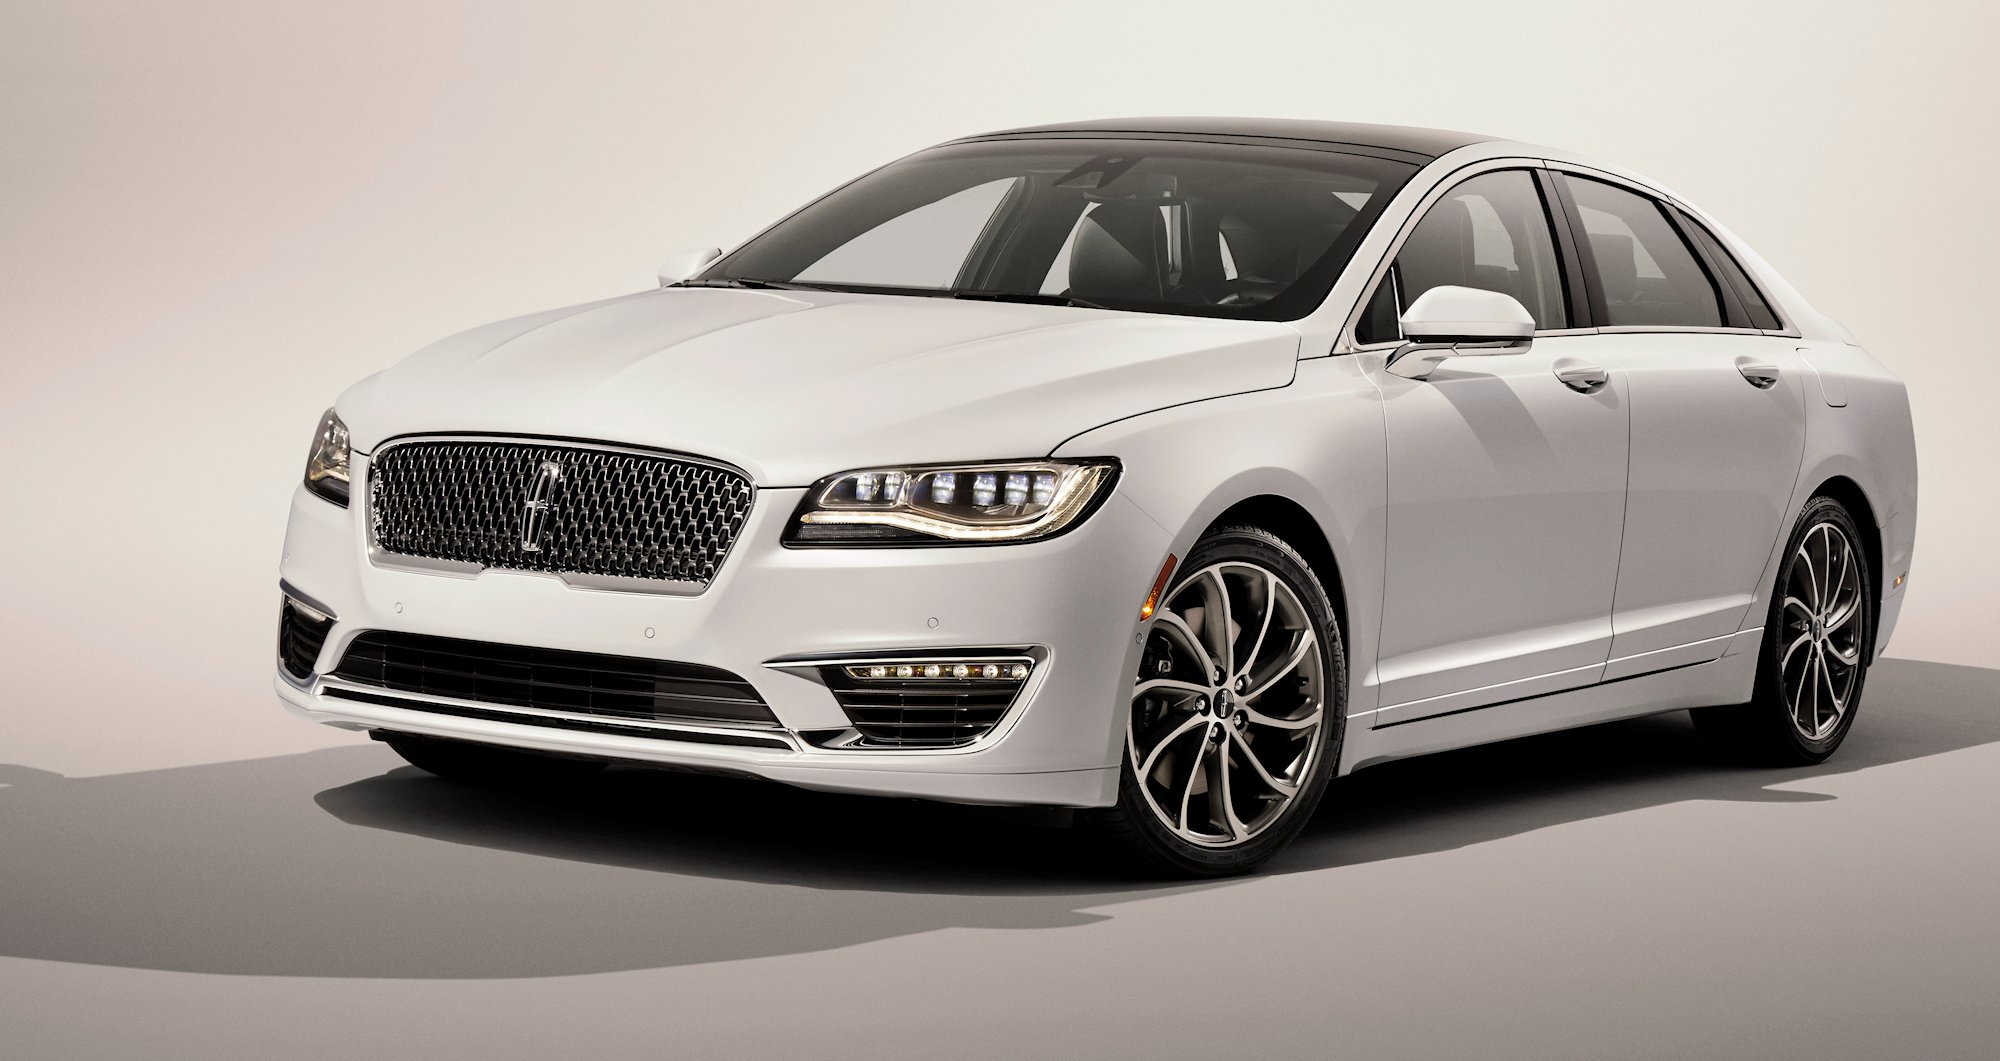 Available Driver’s Package for 2017 Lincoln MKZ with 3.0-liter V6 also includes 19-inch wheels, Ebony-painted calipers, light Magnetic-painted grille, Ebony interior with carbon fiber appliqués, customizable multi-contour seats and aluminum pedal covers. In addition, the package features retuned continuously controlled damping and suspension for enhanced driving dynamics.